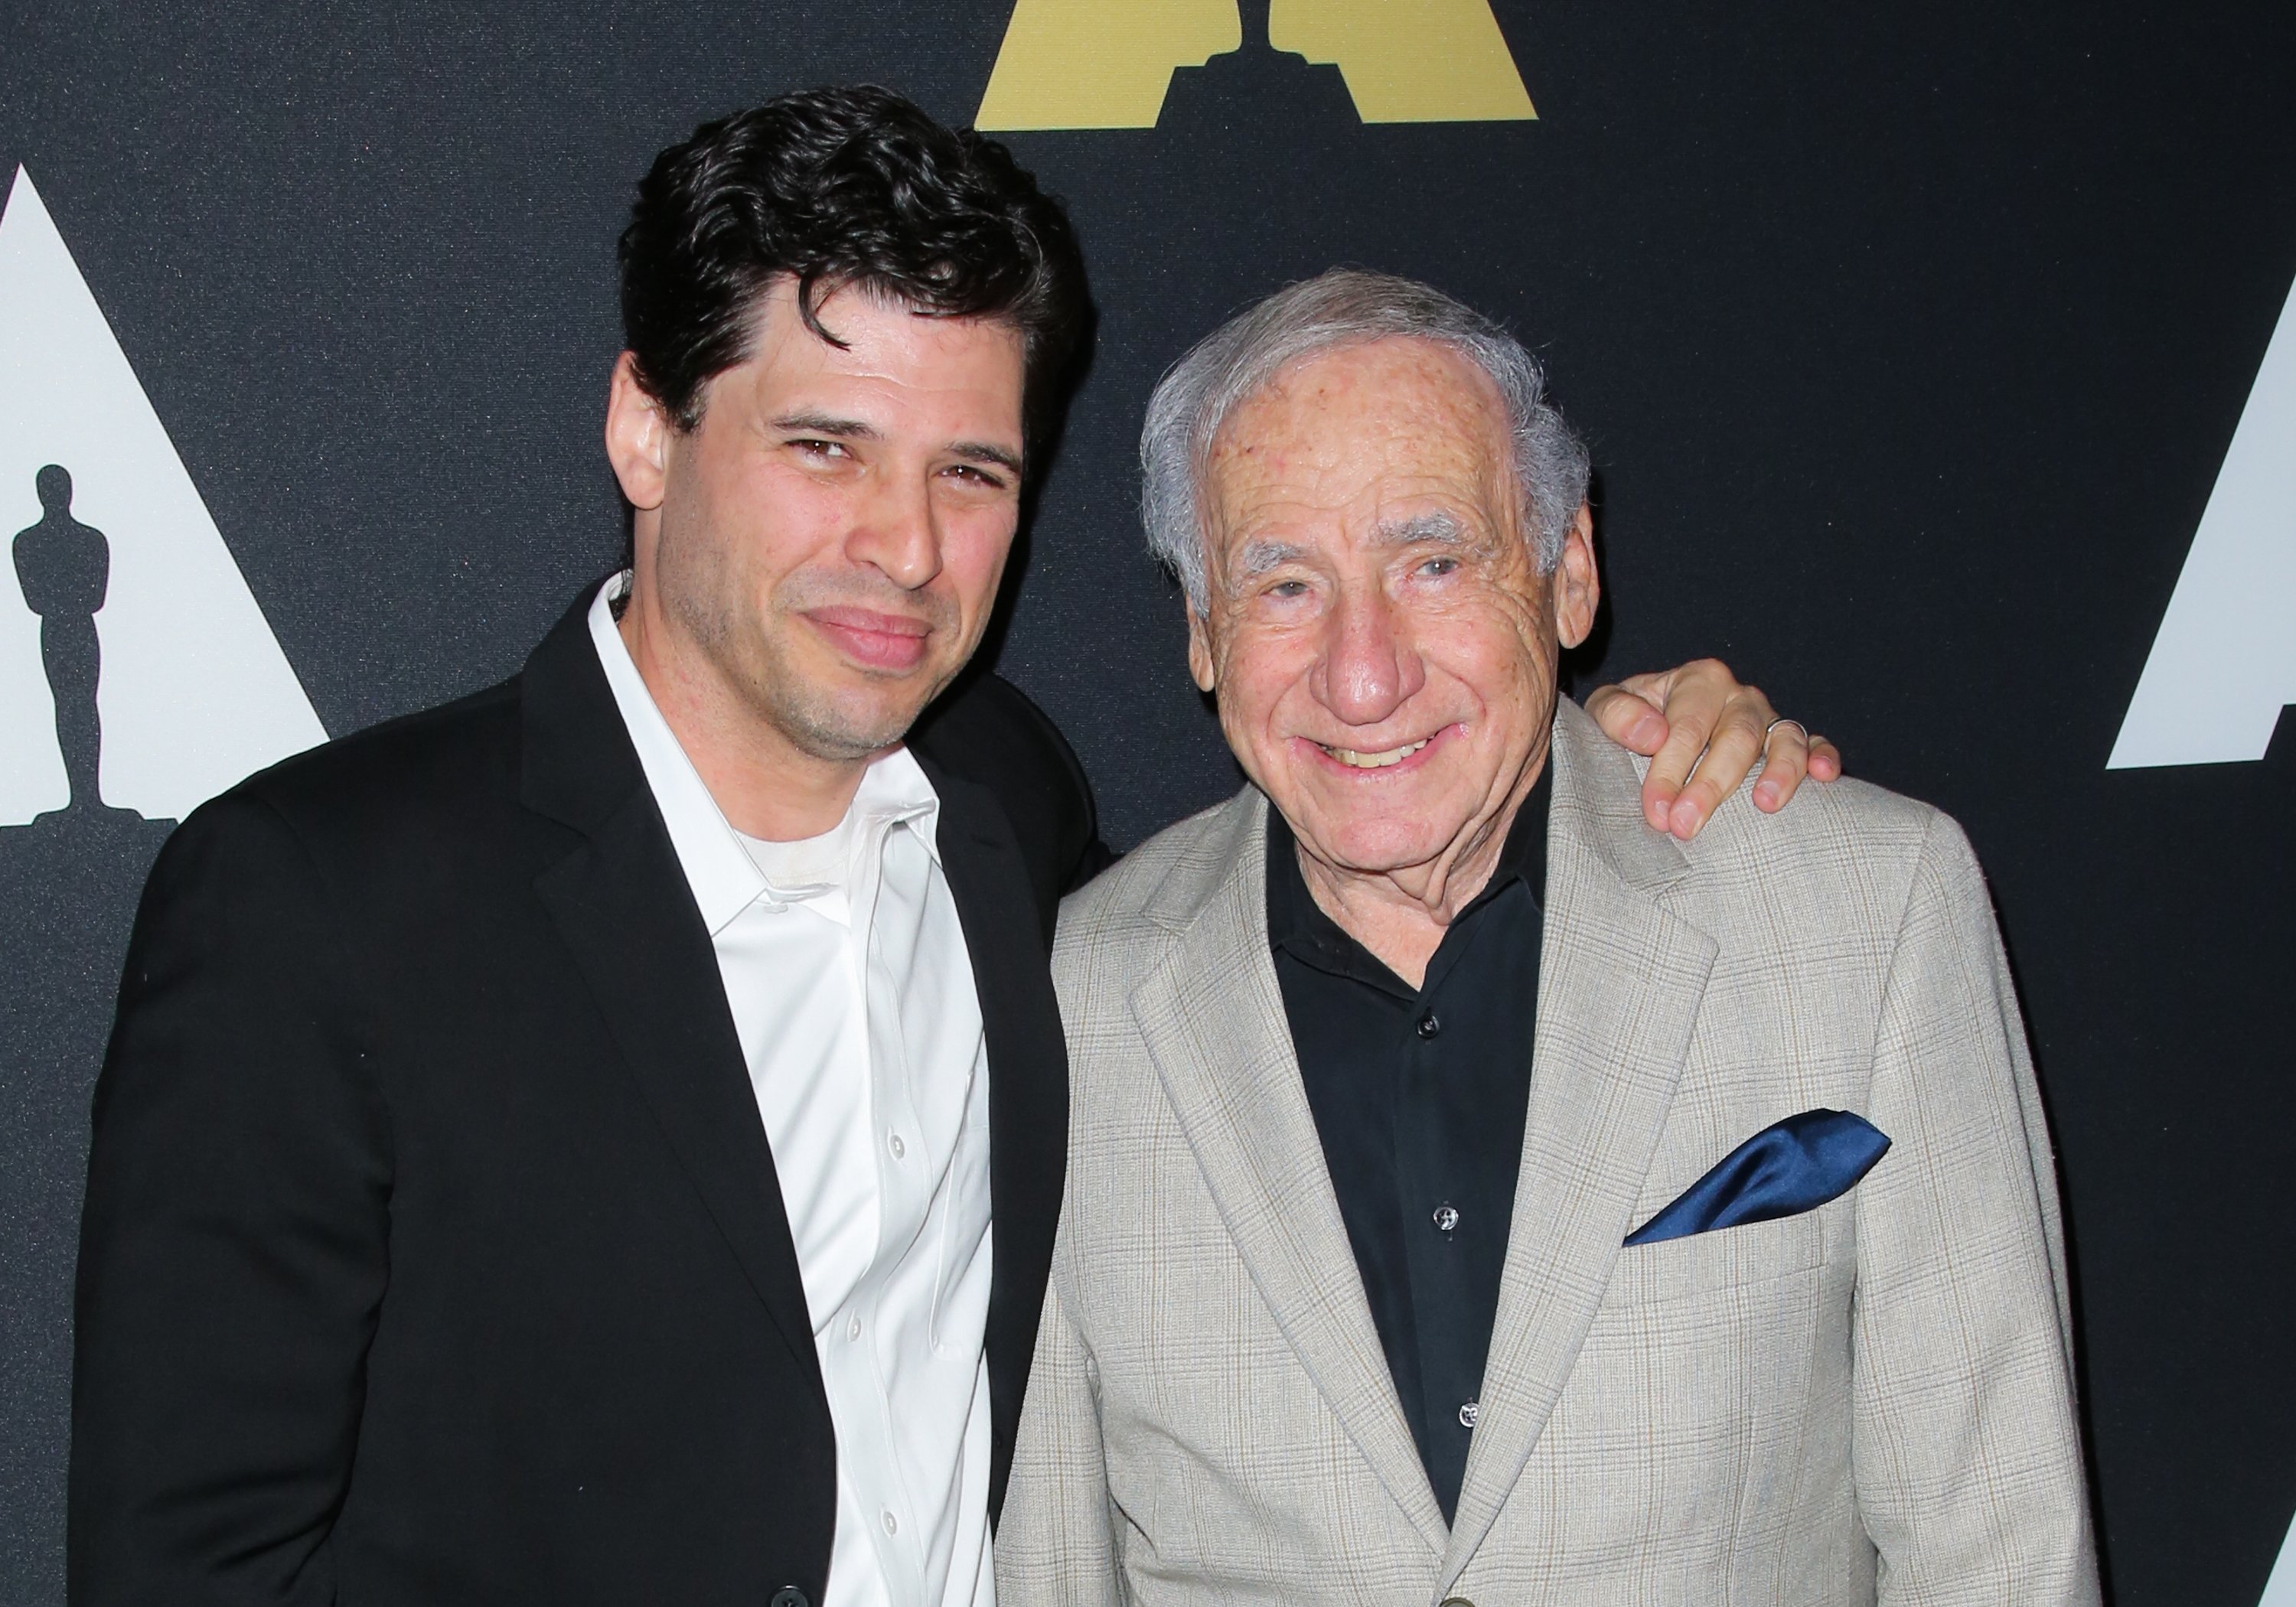 Screenwriter Max Brooks and his father Mel Brooks attend the 20th anniversary screening of "The Shawshank Redemption" at the AMPAS Samuel Goldwyn Theater on November 18, 2014 in Beverly Hills, California ┃Source: Getty Images